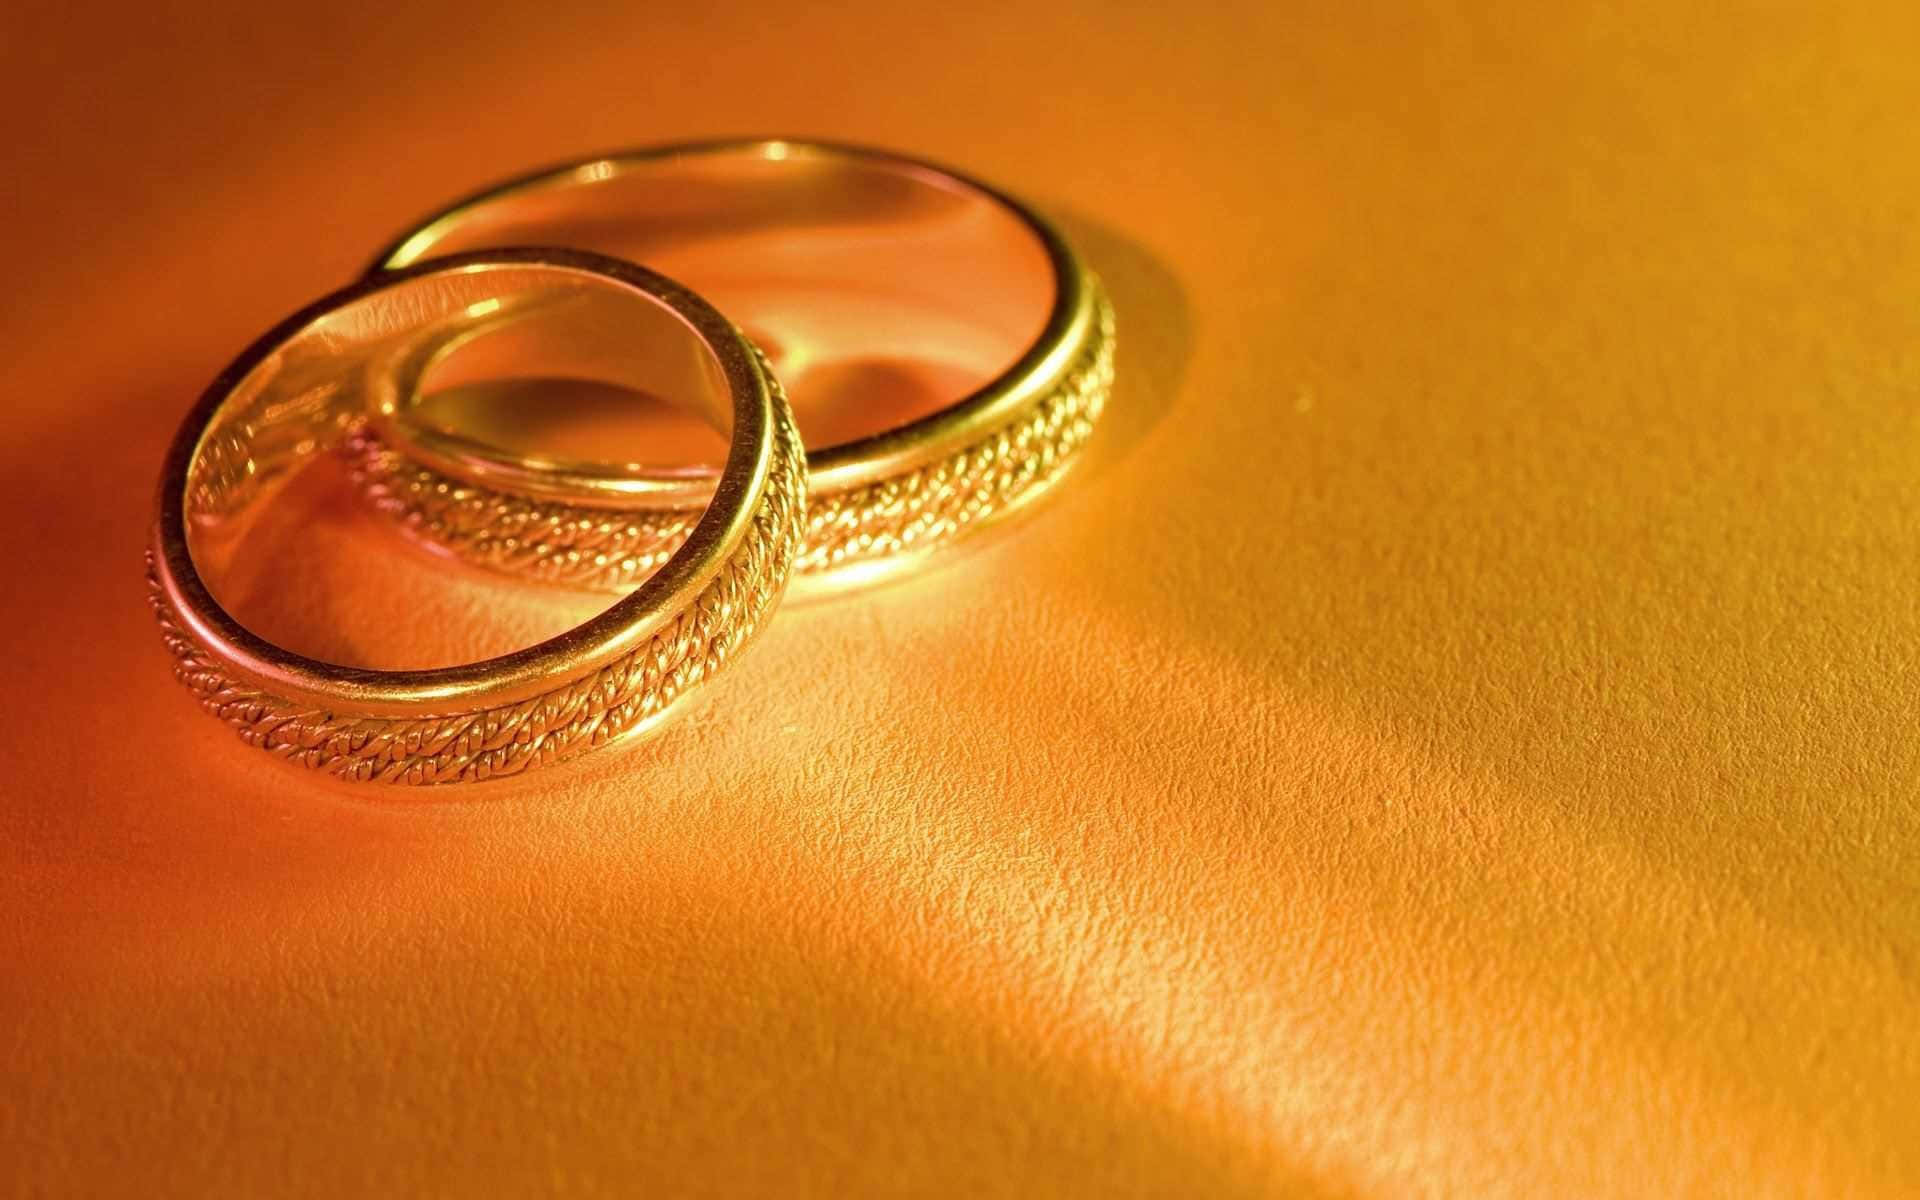 Two Gold Wedding Rings On A Yellow Surface